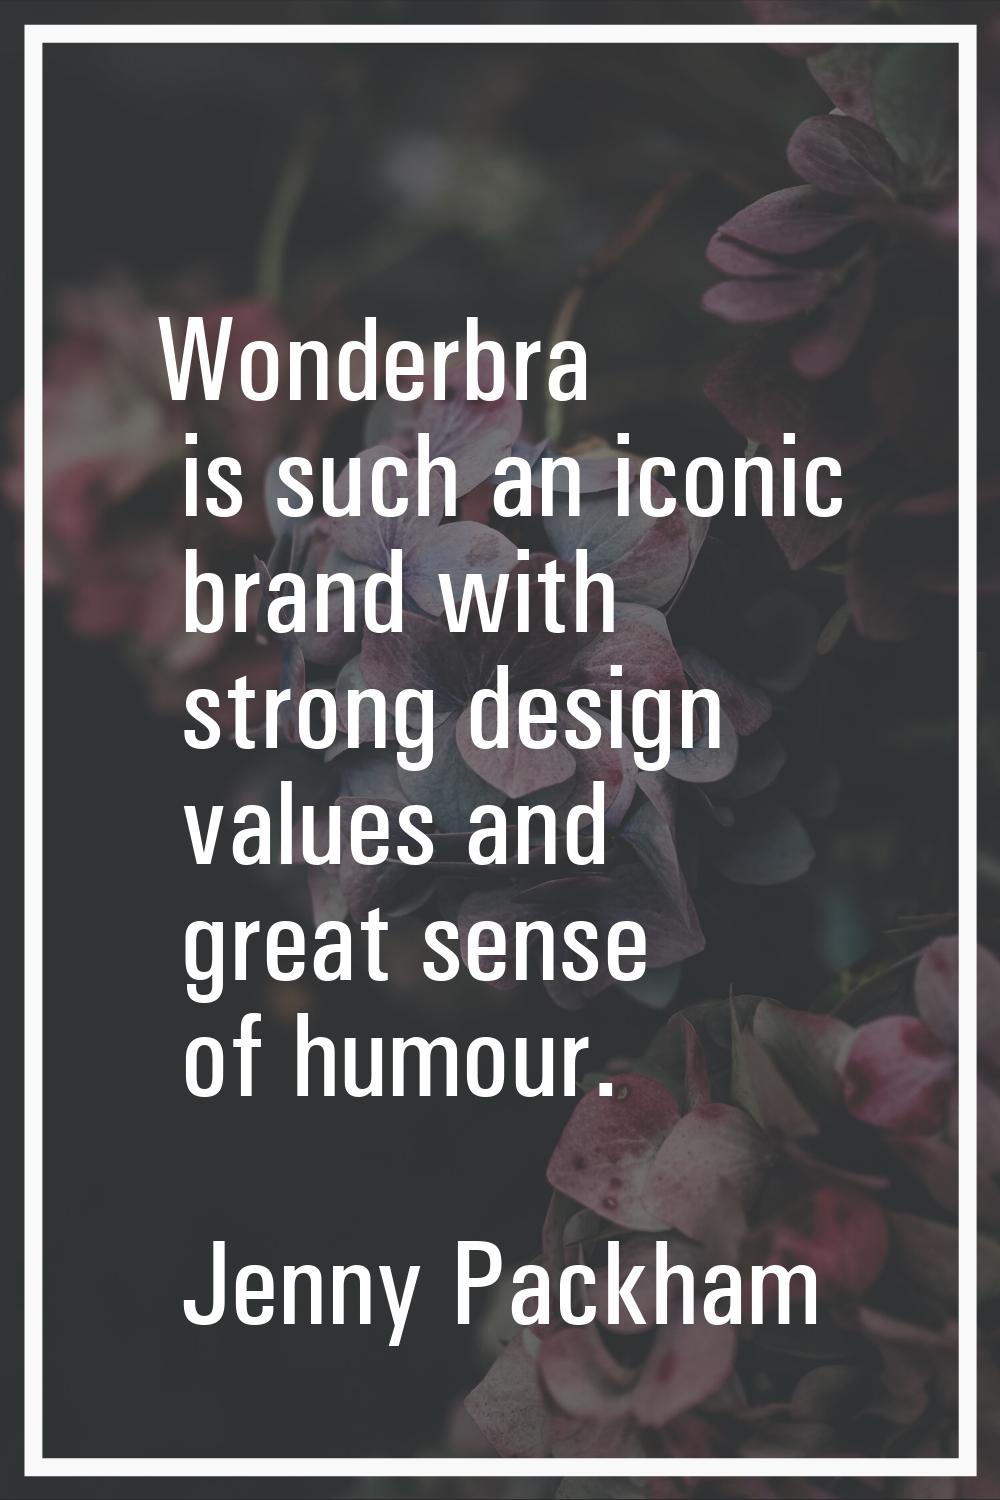 Wonderbra is such an iconic brand with strong design values and great sense of humour.